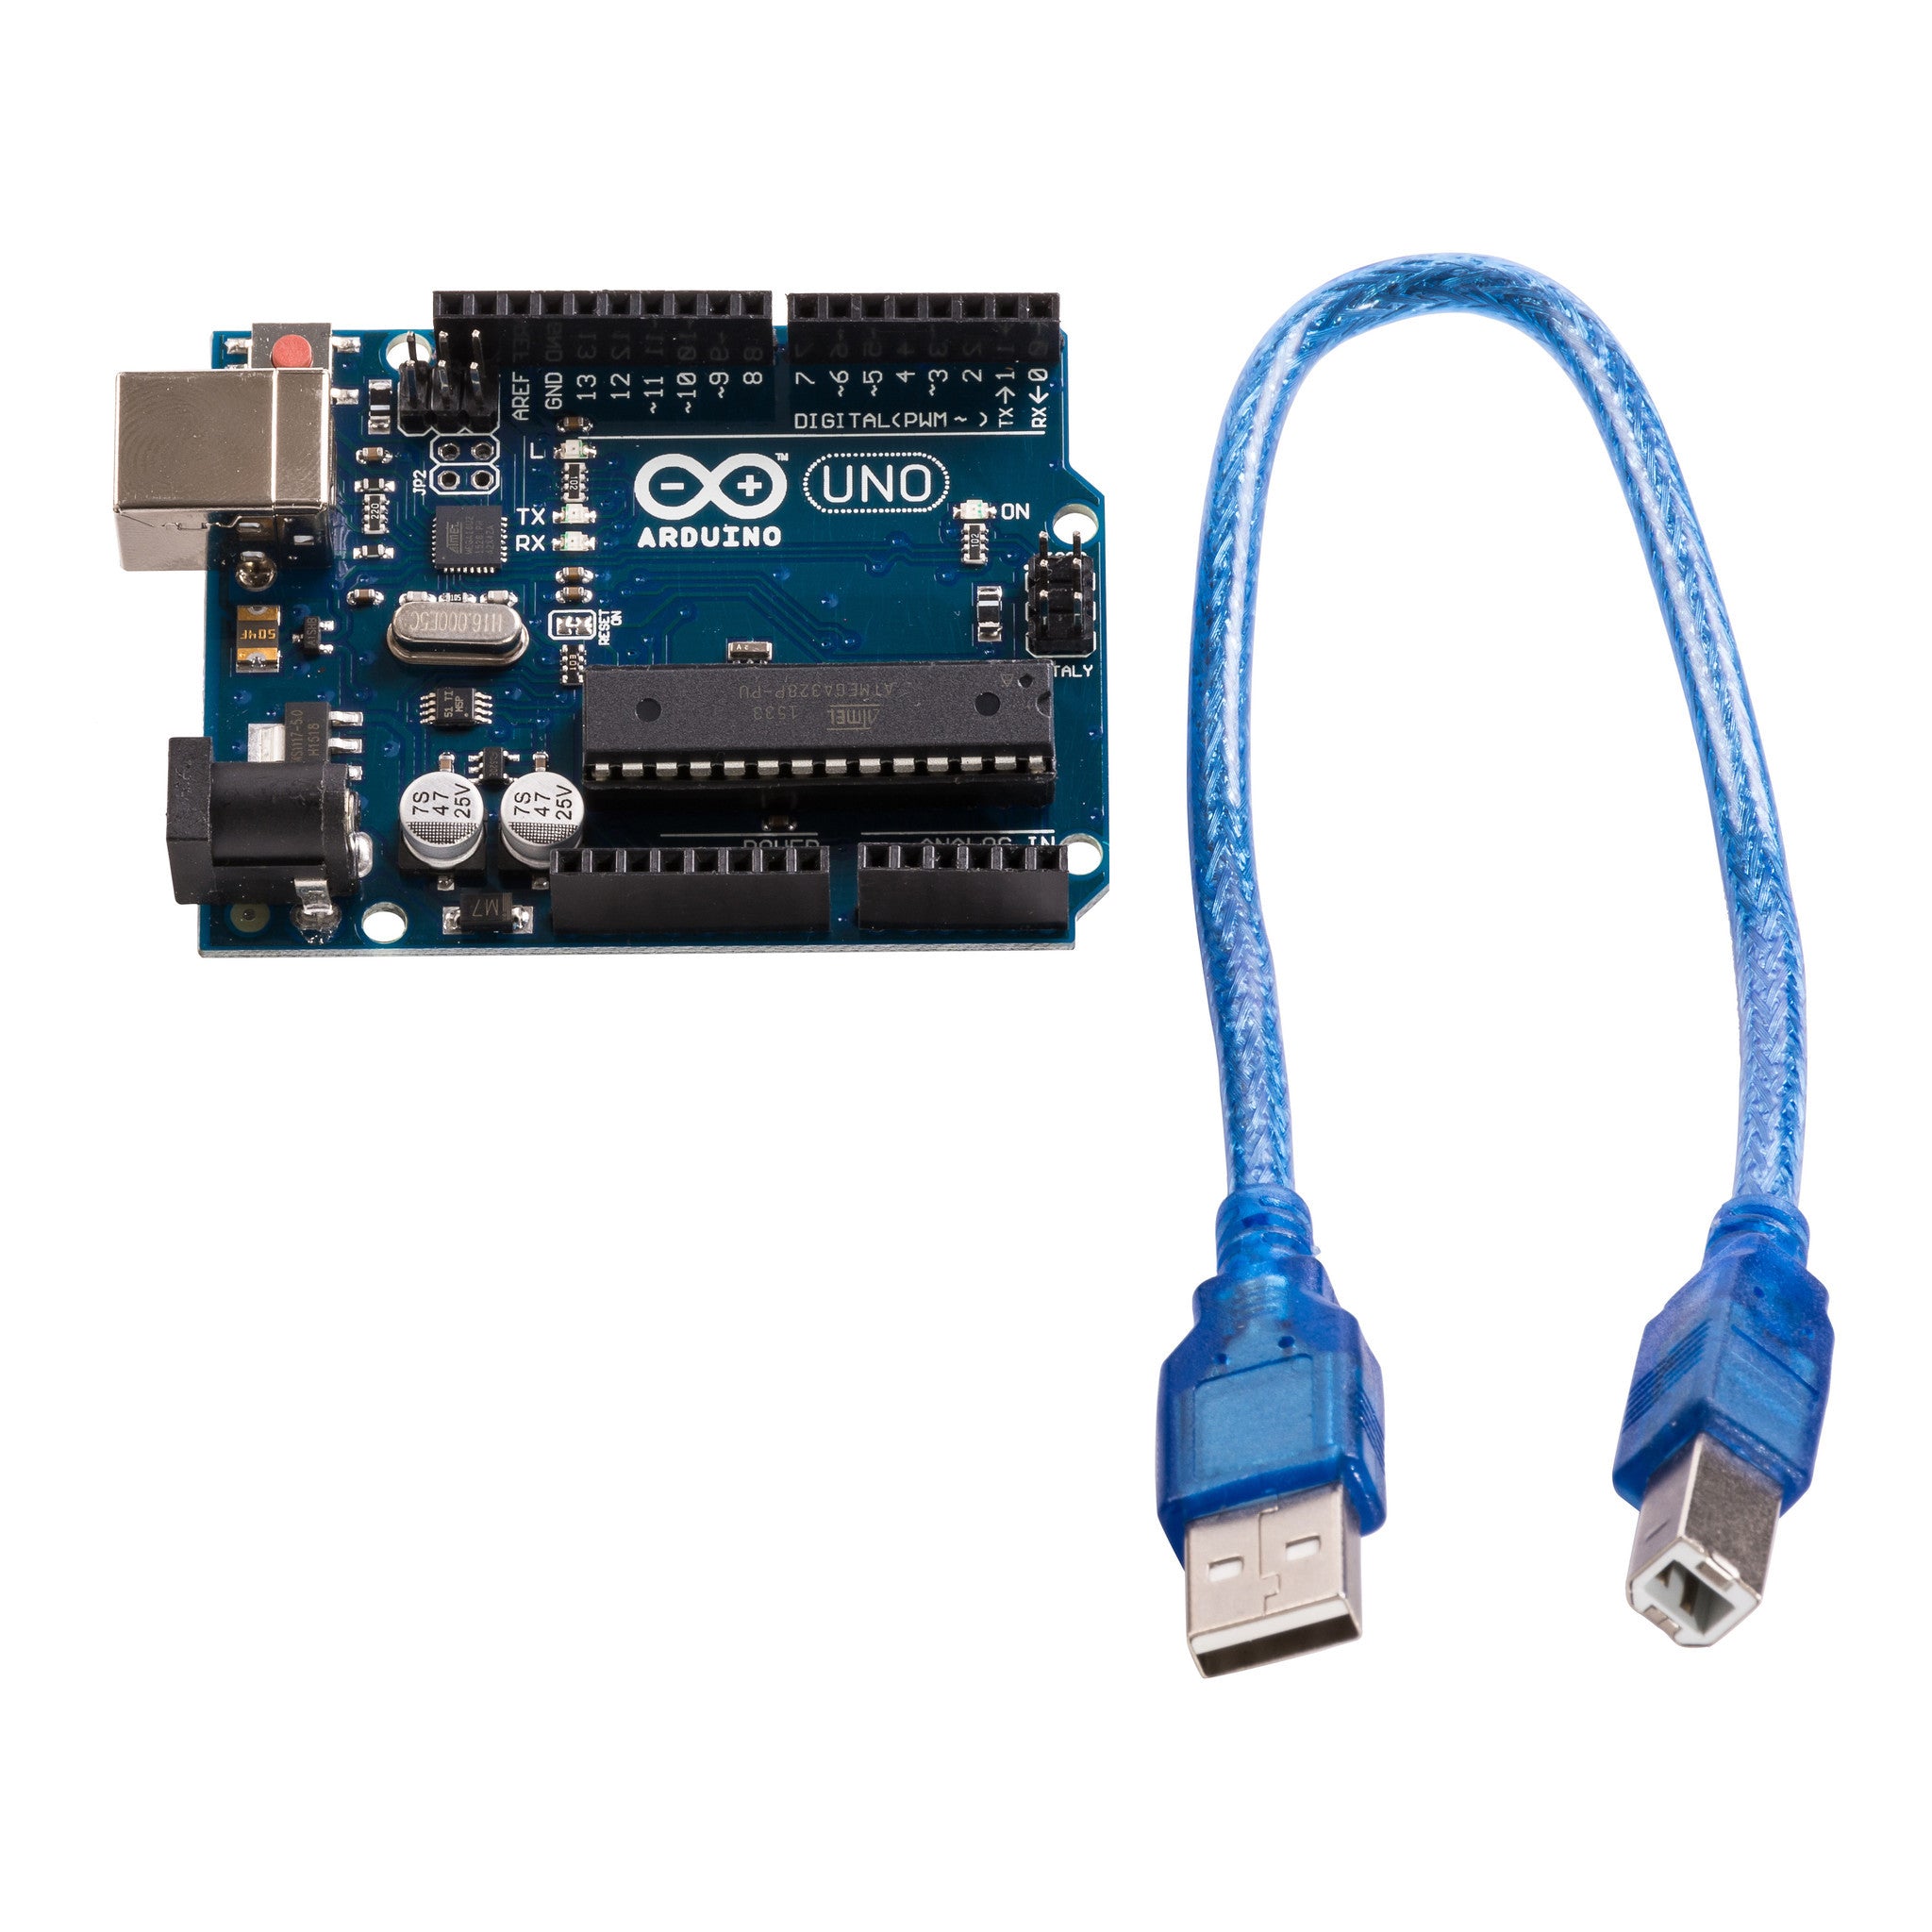 Arduino Uno R3 Microcontroller Product Image